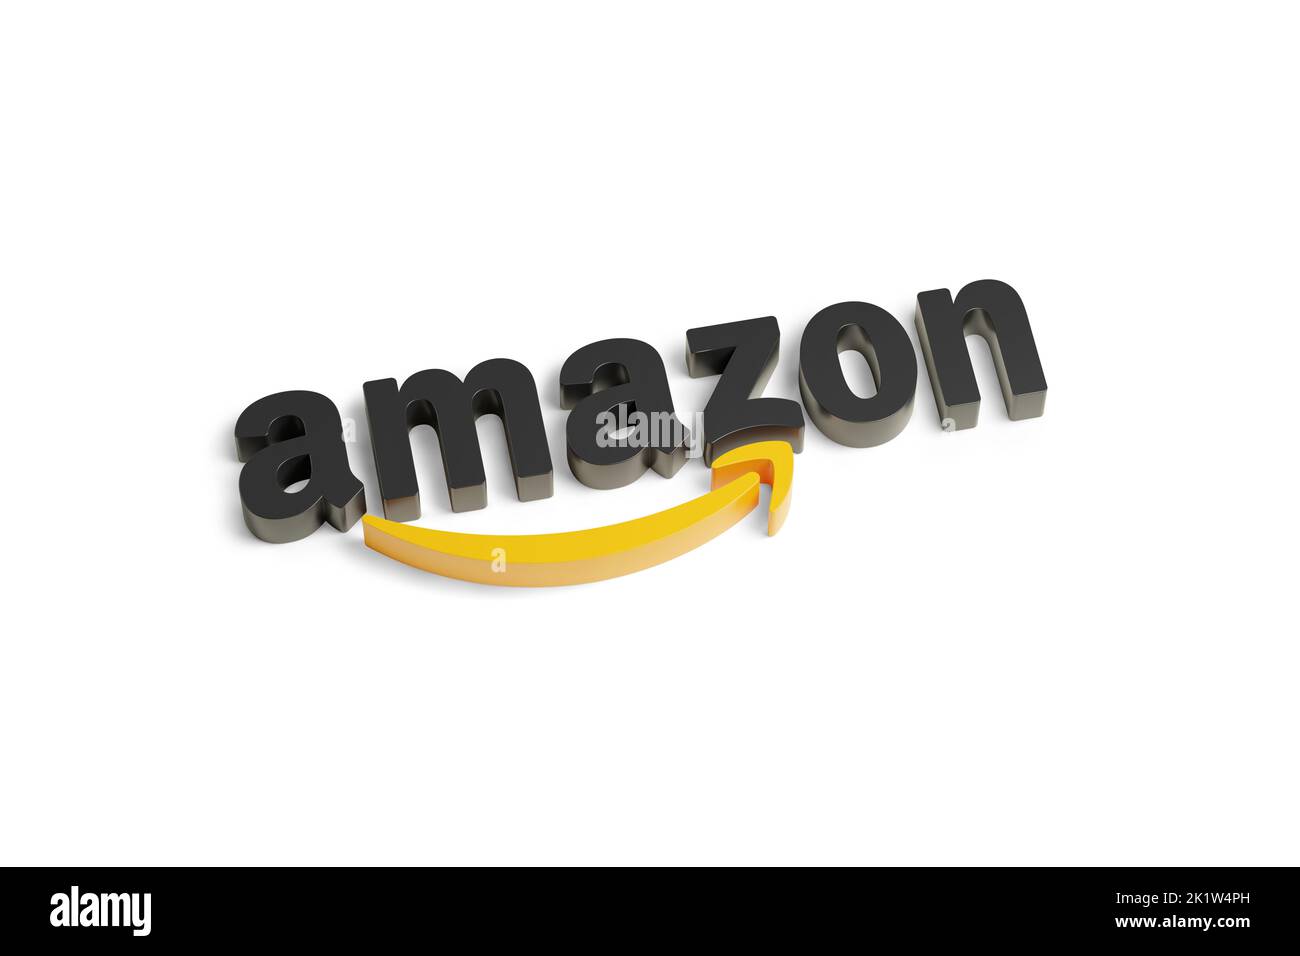 Buenos Aires, Argentina - September 17th, 2022: Three-dimensional Amazon logo isolated on white background. 3d illustration. Stock Photo